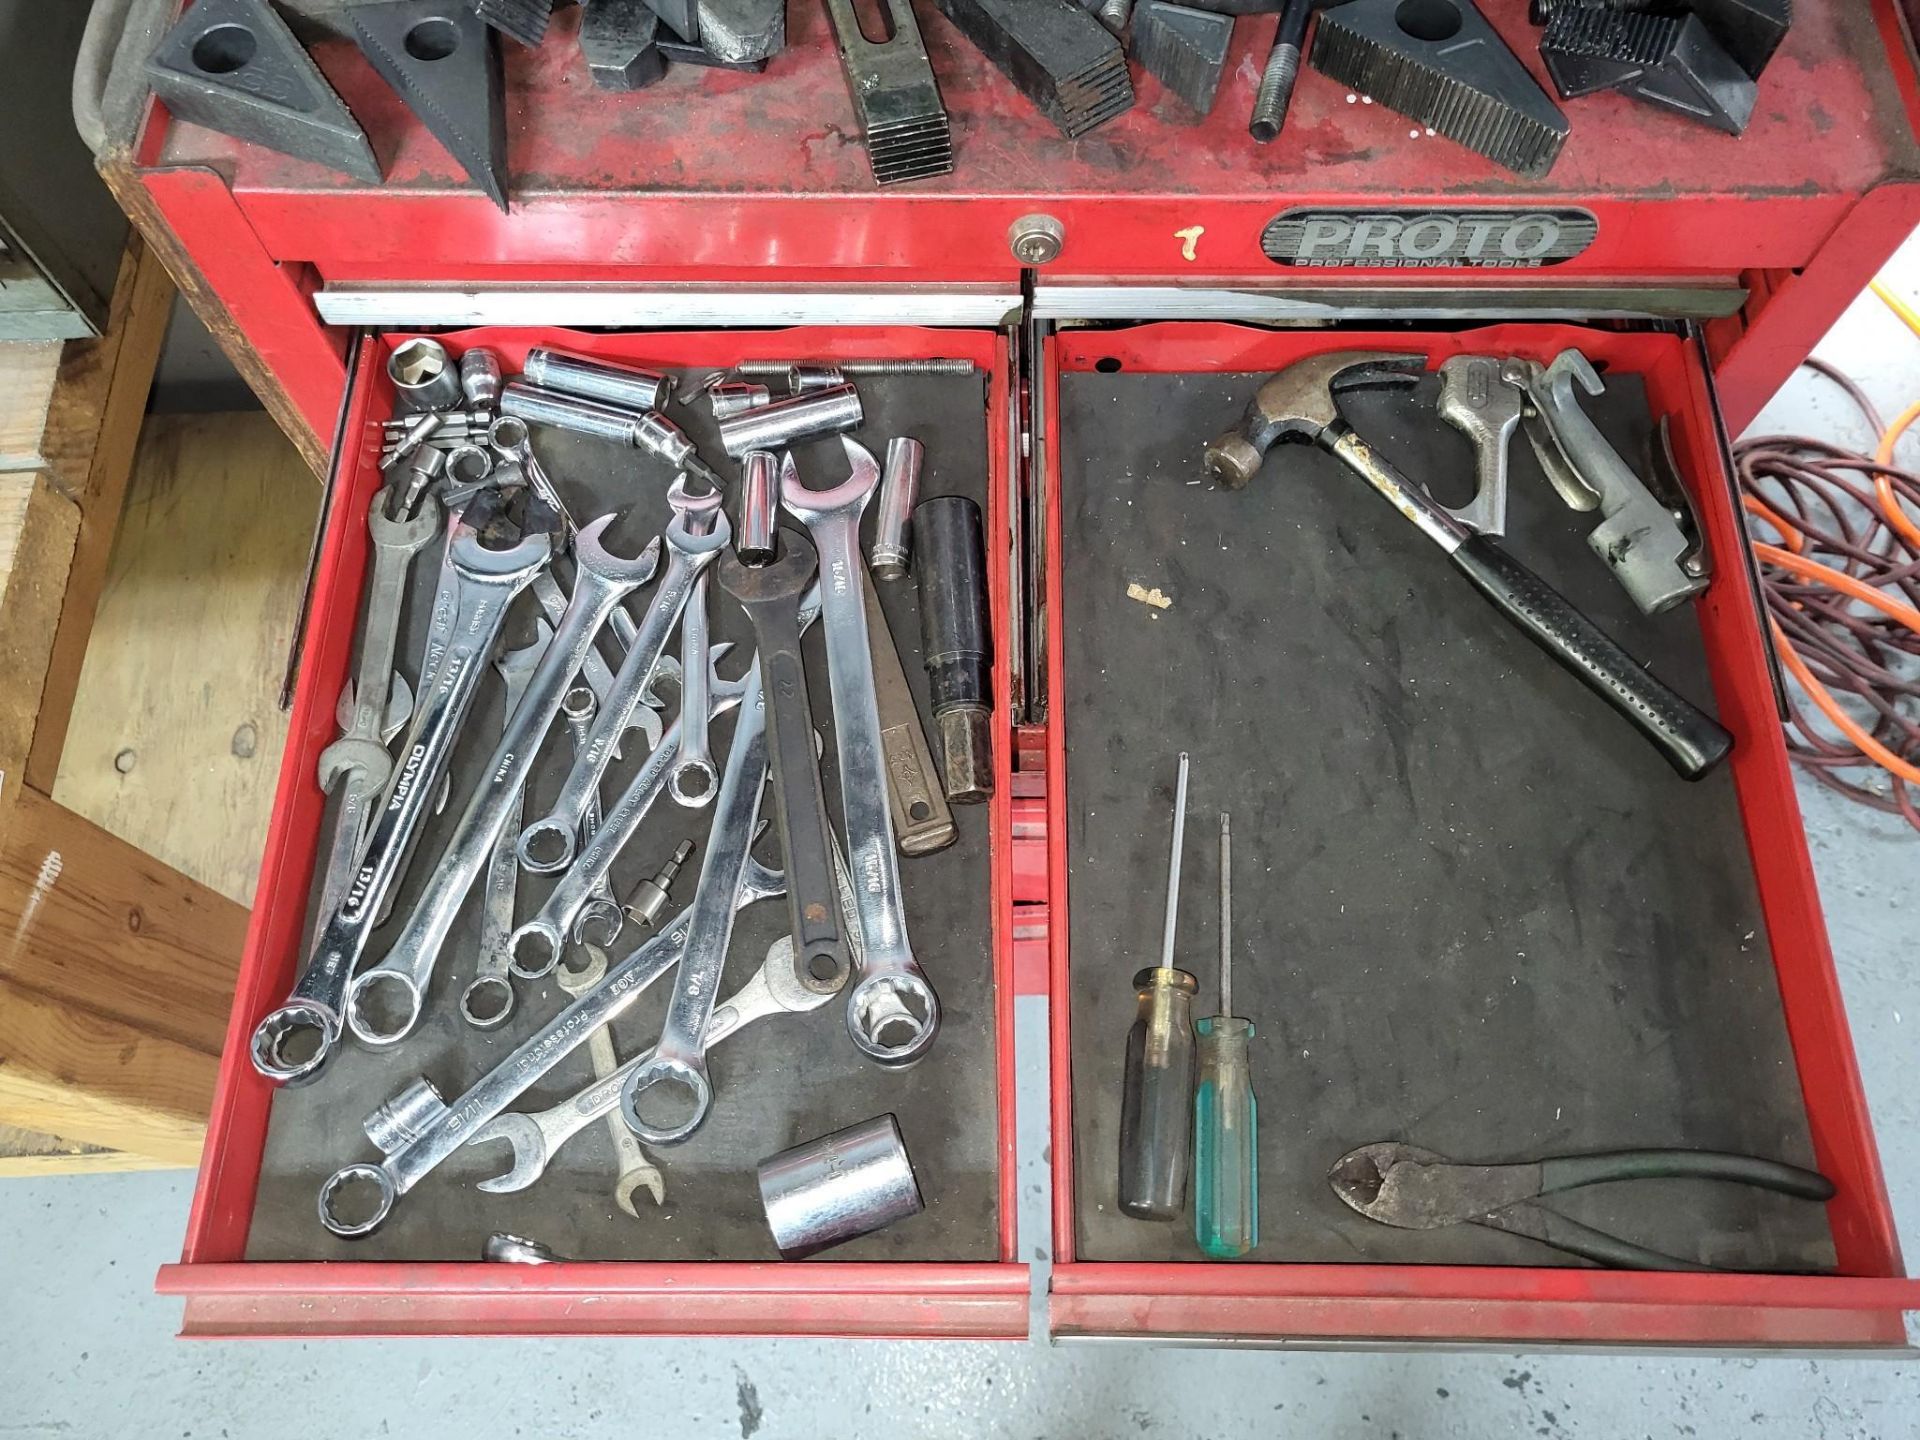 LARGE LOT OF MILLING TOOLS, TAPS, CARBIDE INSERTS, SETUP HARDWARE AND HAND TOOLS - Image 4 of 24